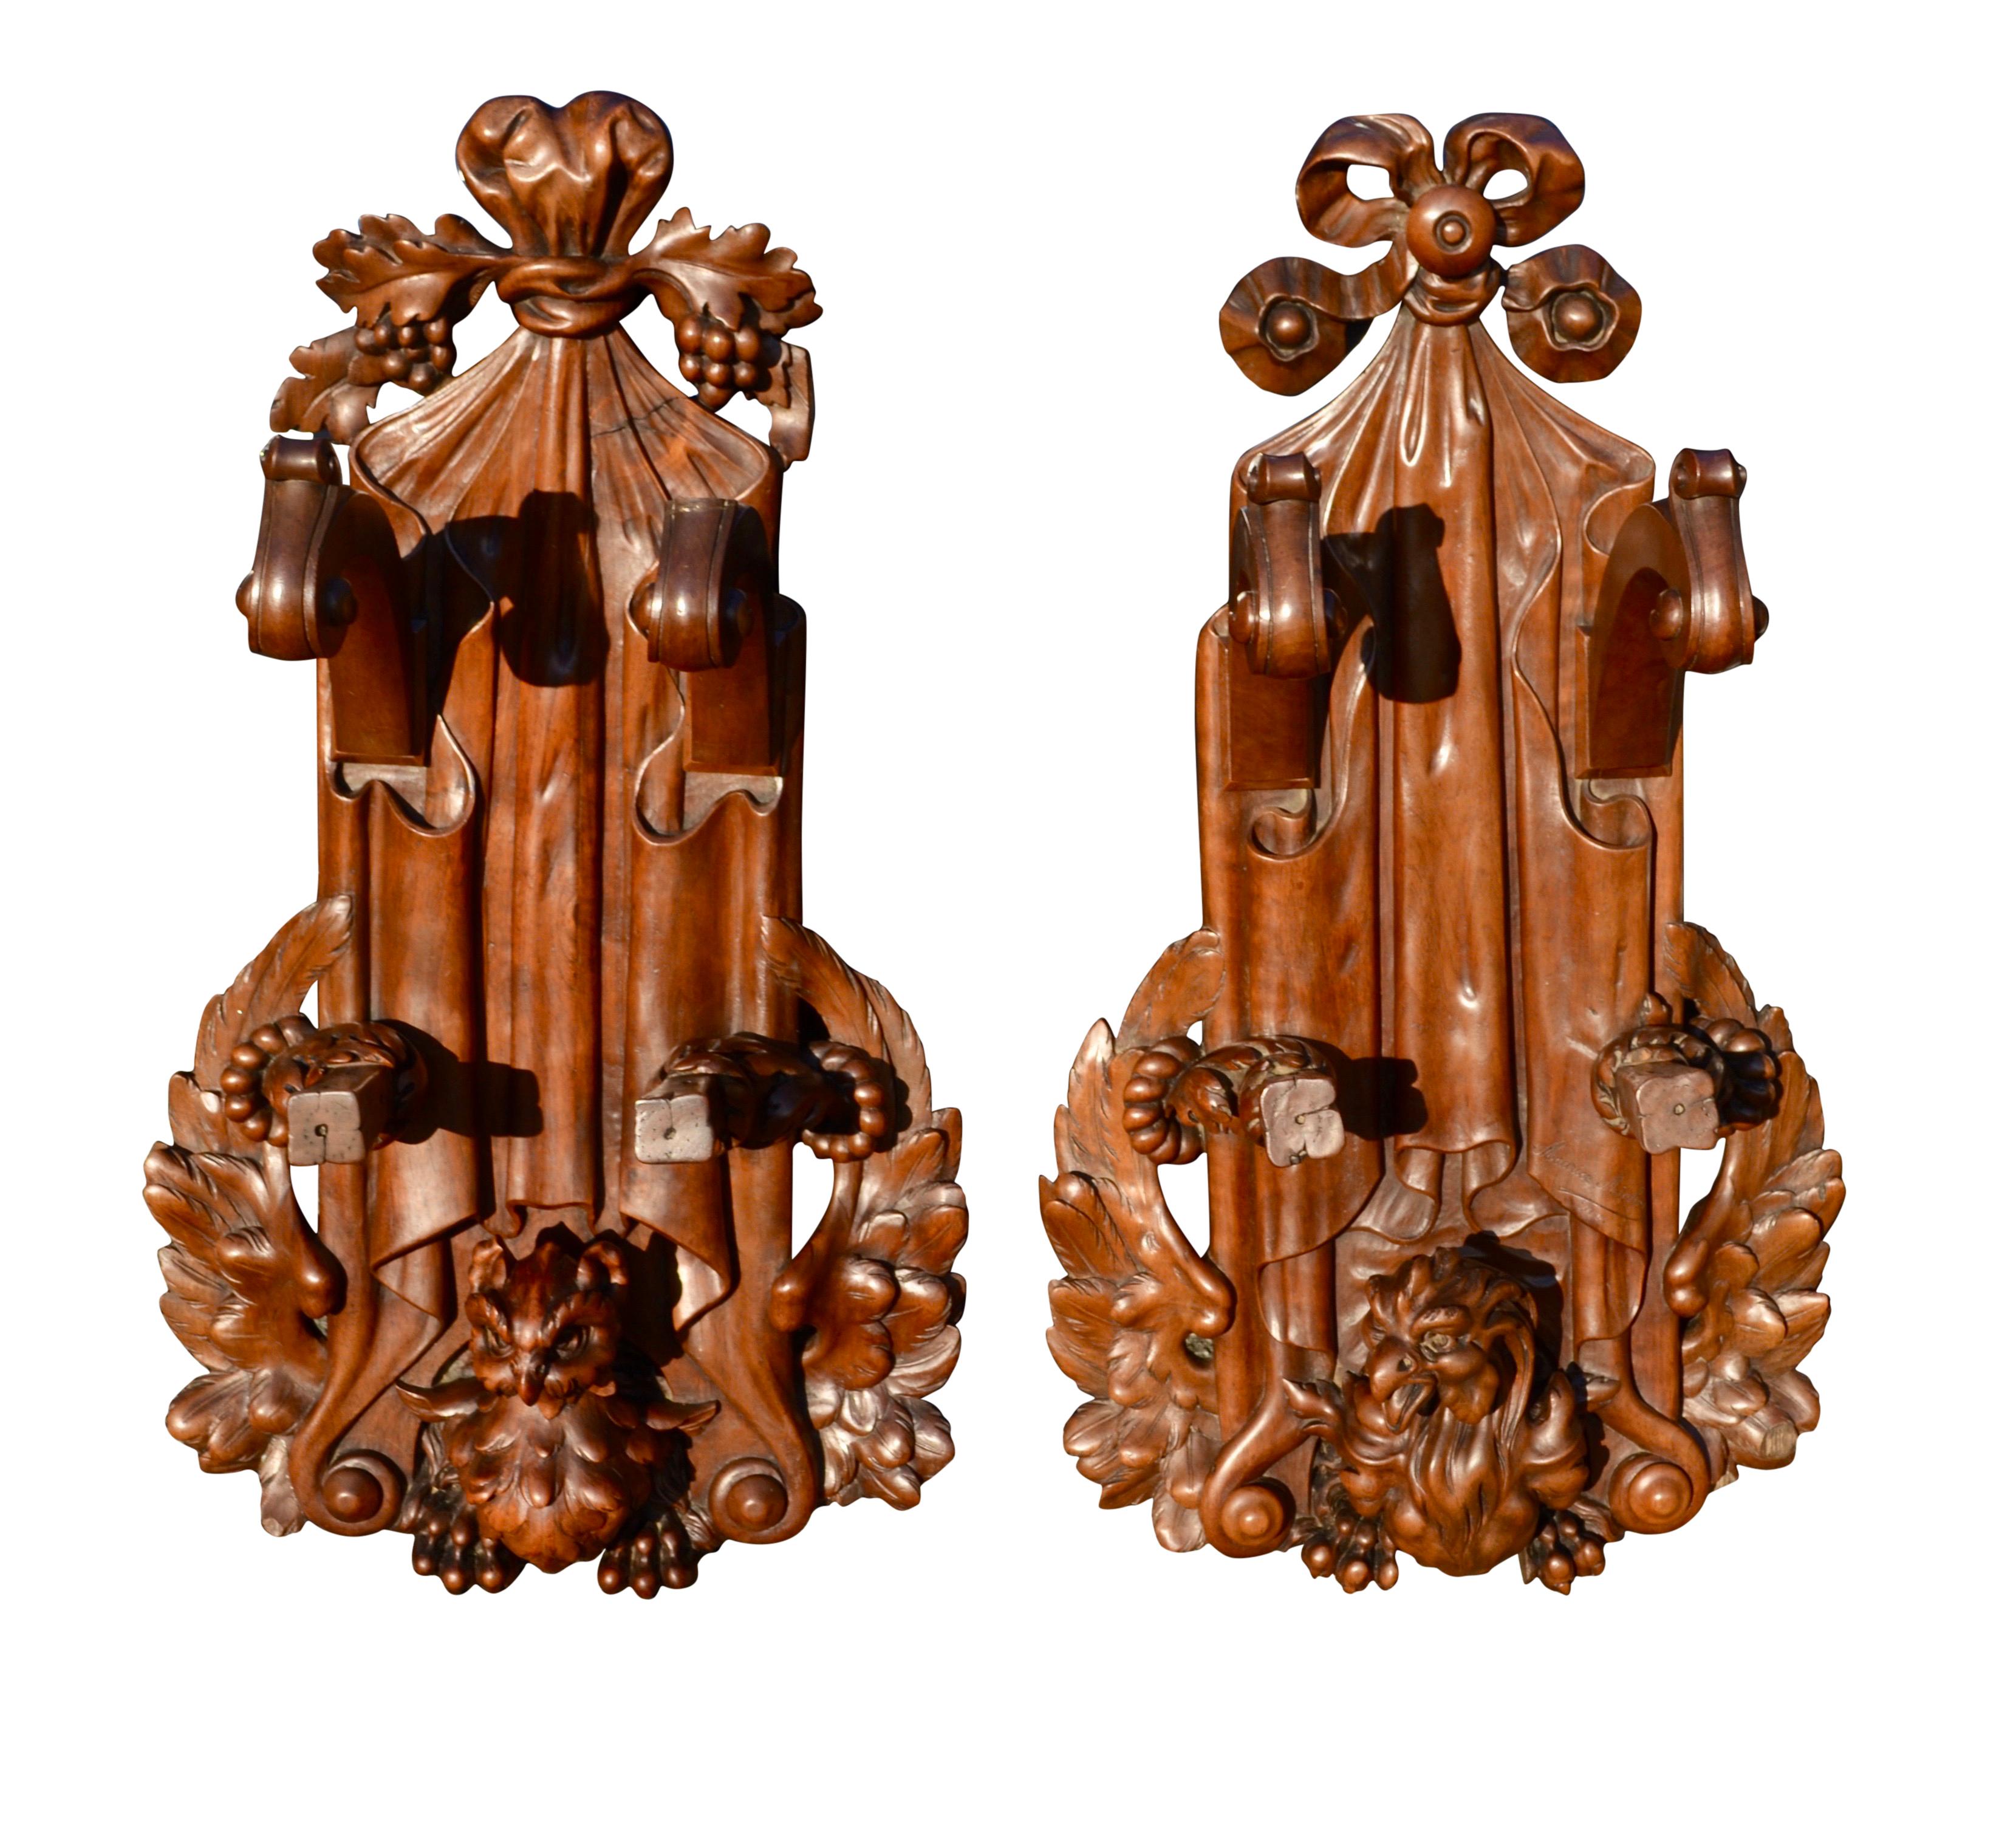 A highly rare and most unusual pair of carved walnut gun racks, each with a different carved bird at the bottom, one being a hawk or eagle with spread wings and talons along the bottom; the second bird looking more like an angry owl, also with